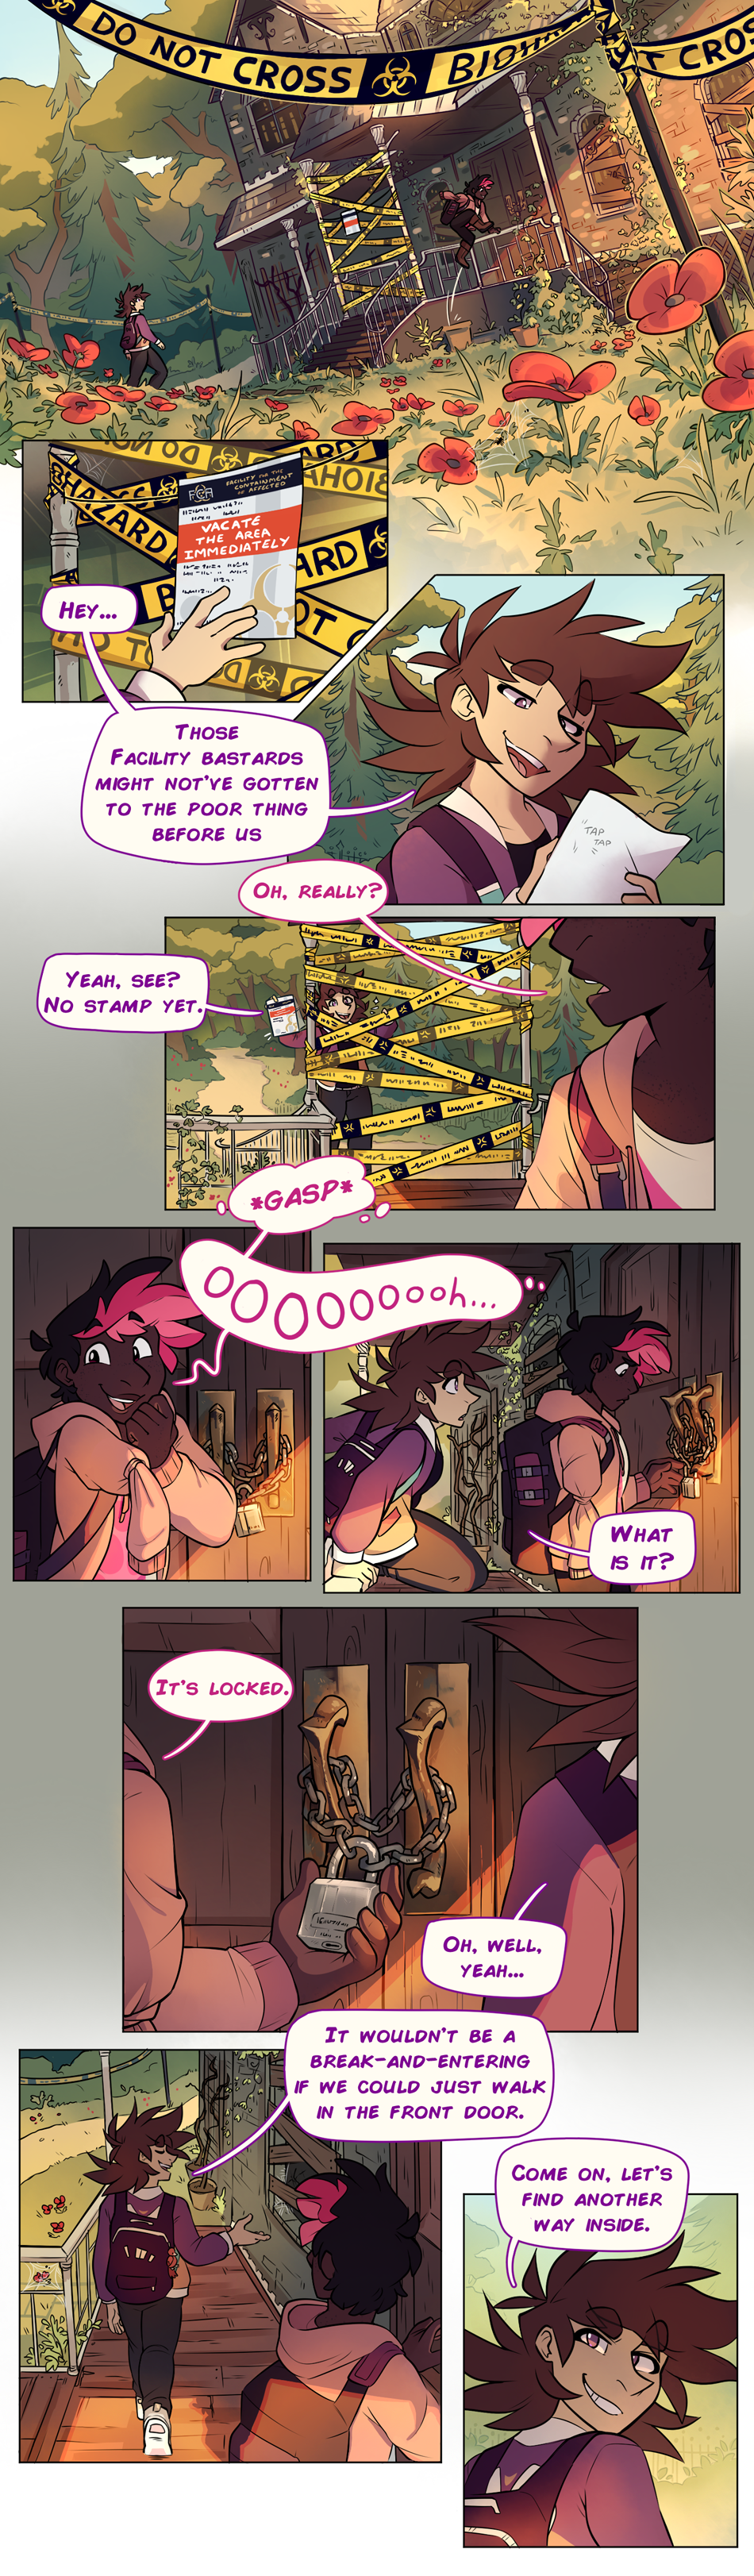 CH1_Page5